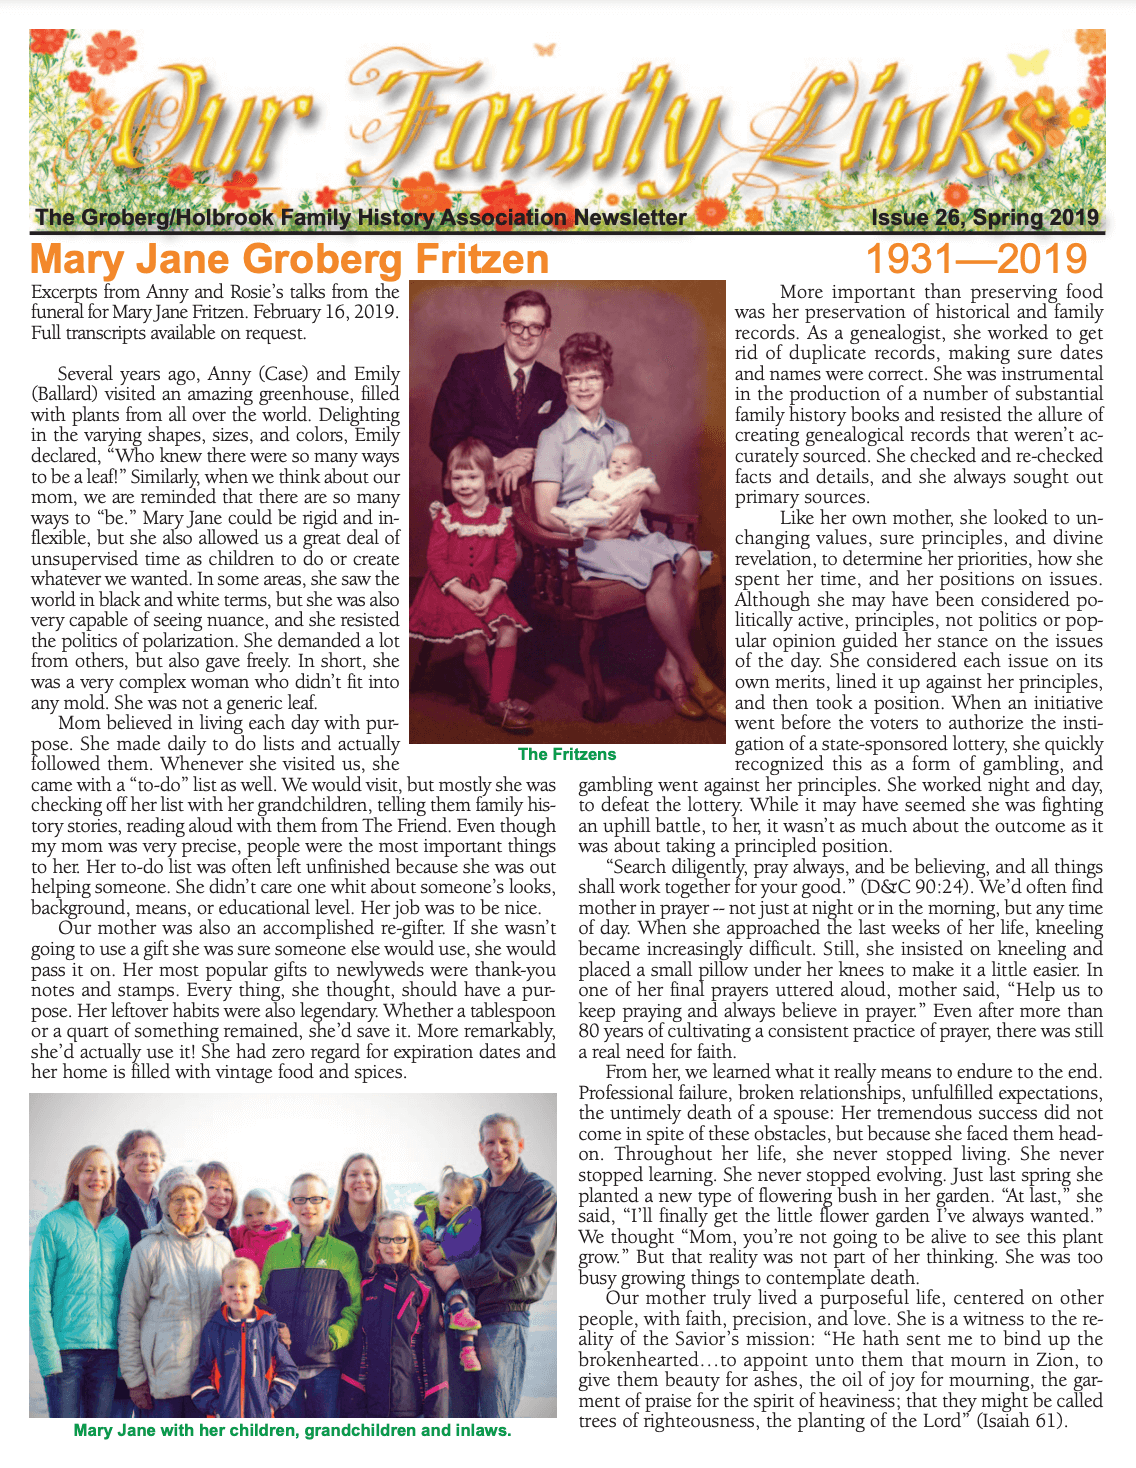 The front page of this issue's family newsletter